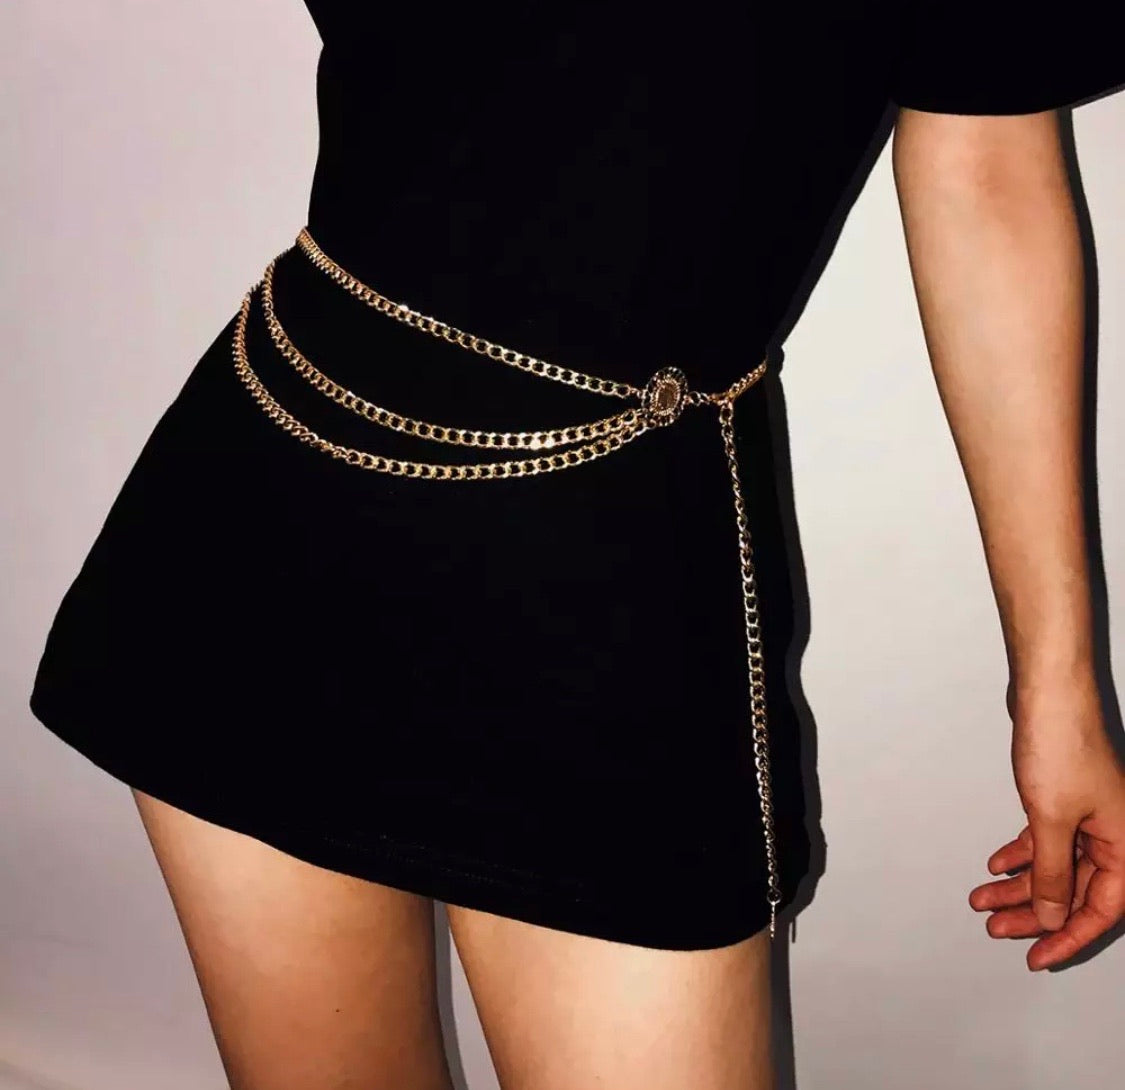 Bougee chain belt